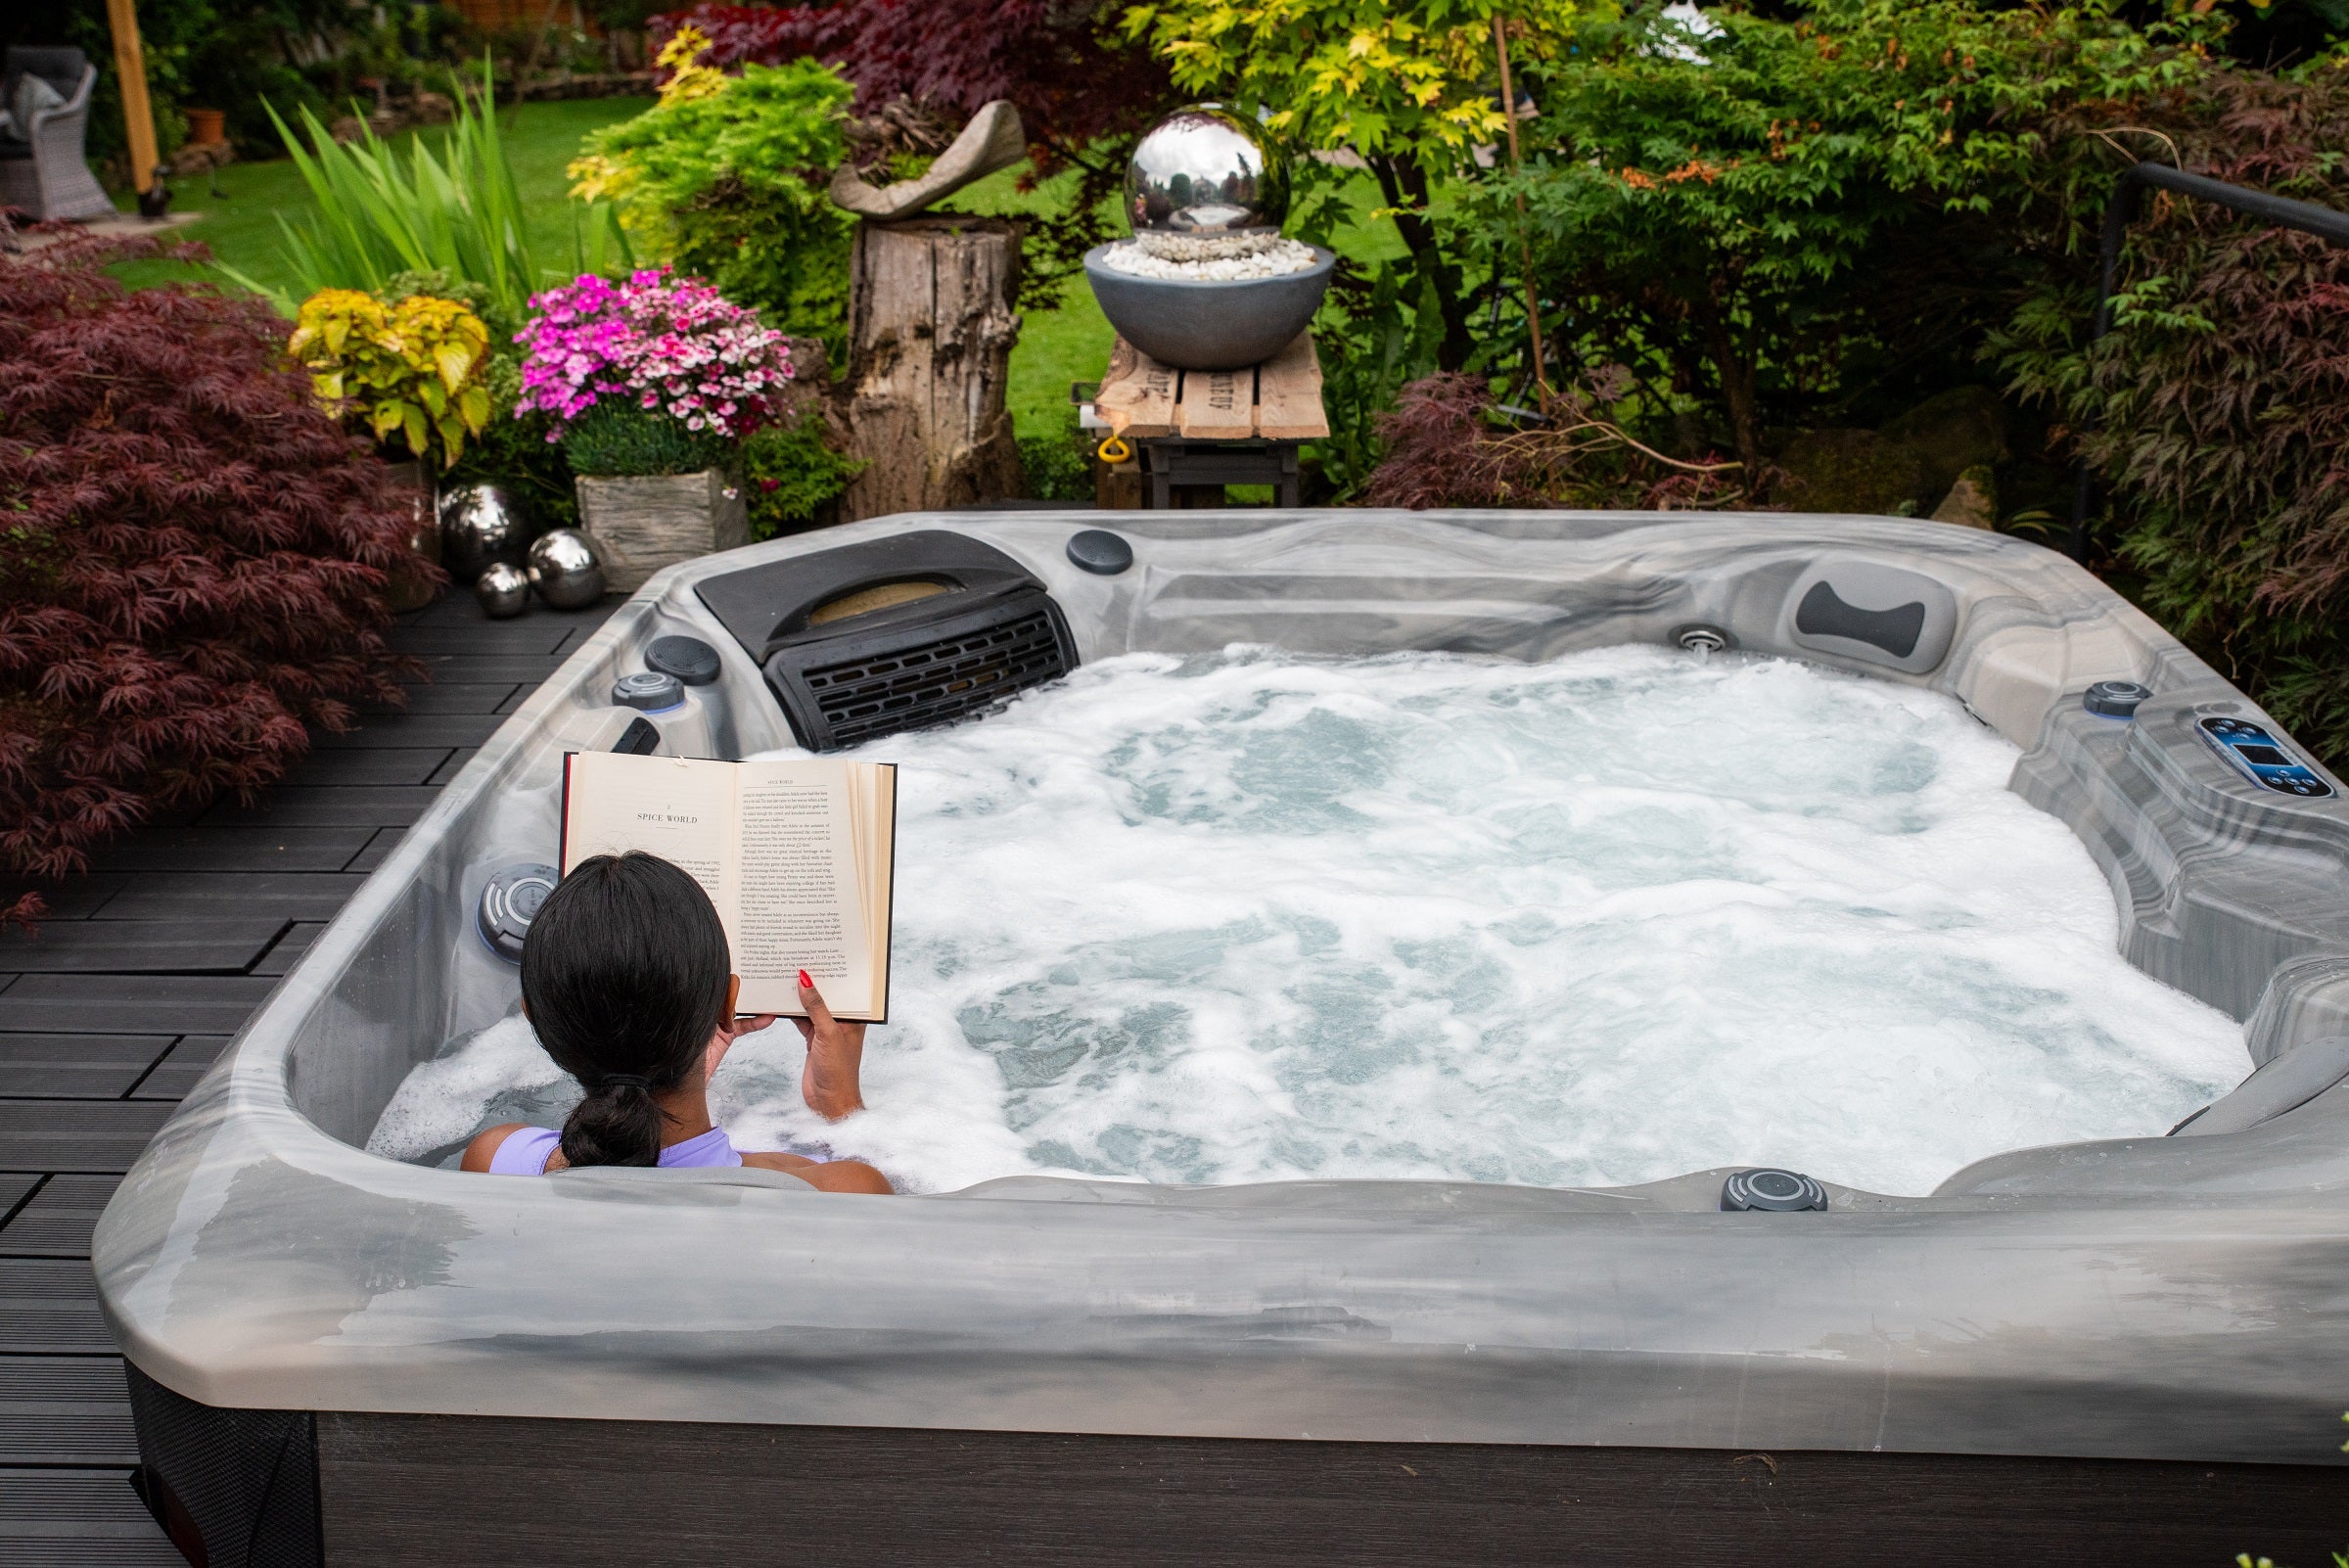 How to Shop for a Hot Tub